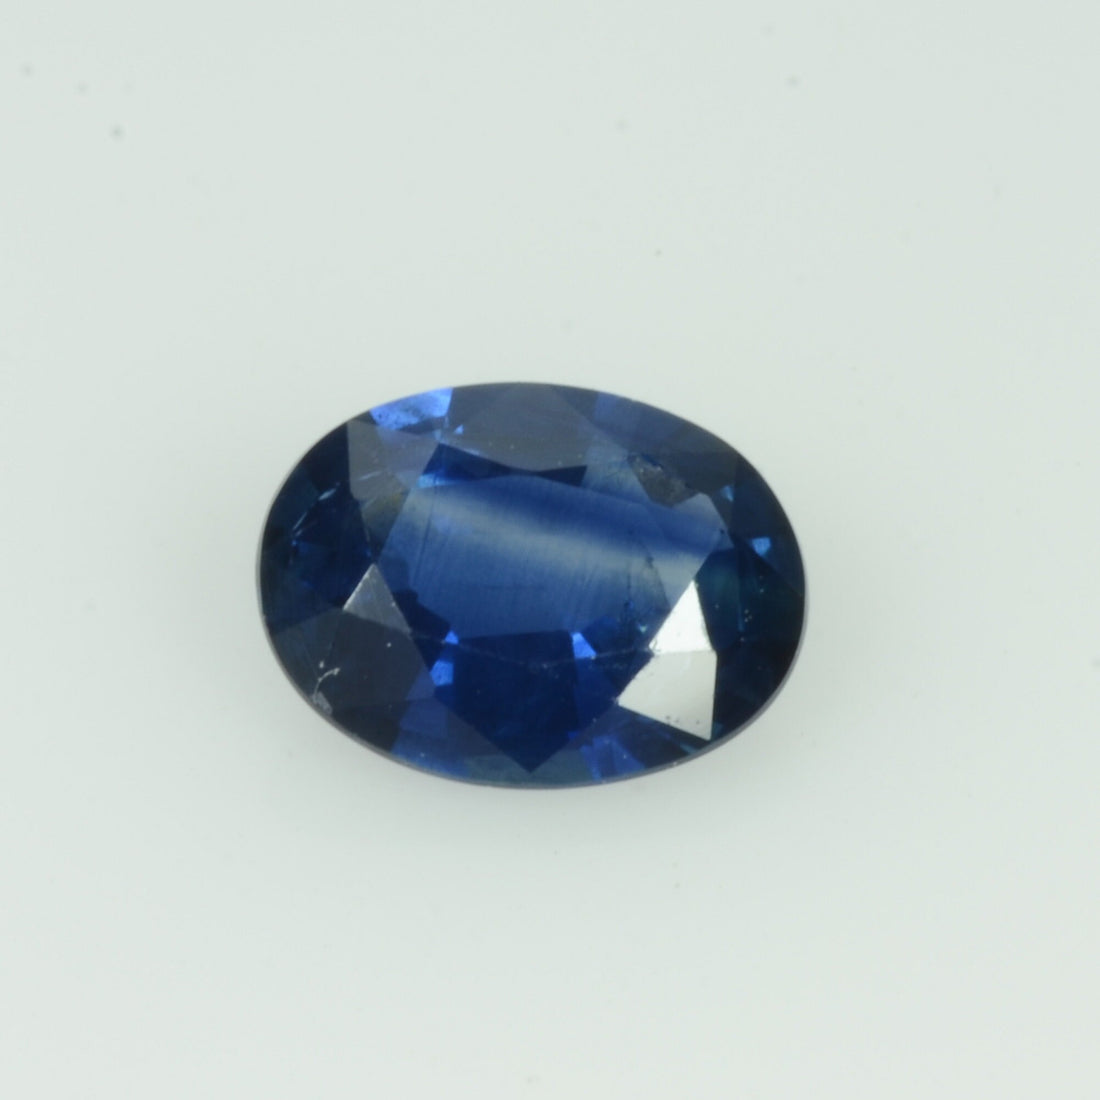 0.68 cts natural blue sapphire loose gemstone Oval cut